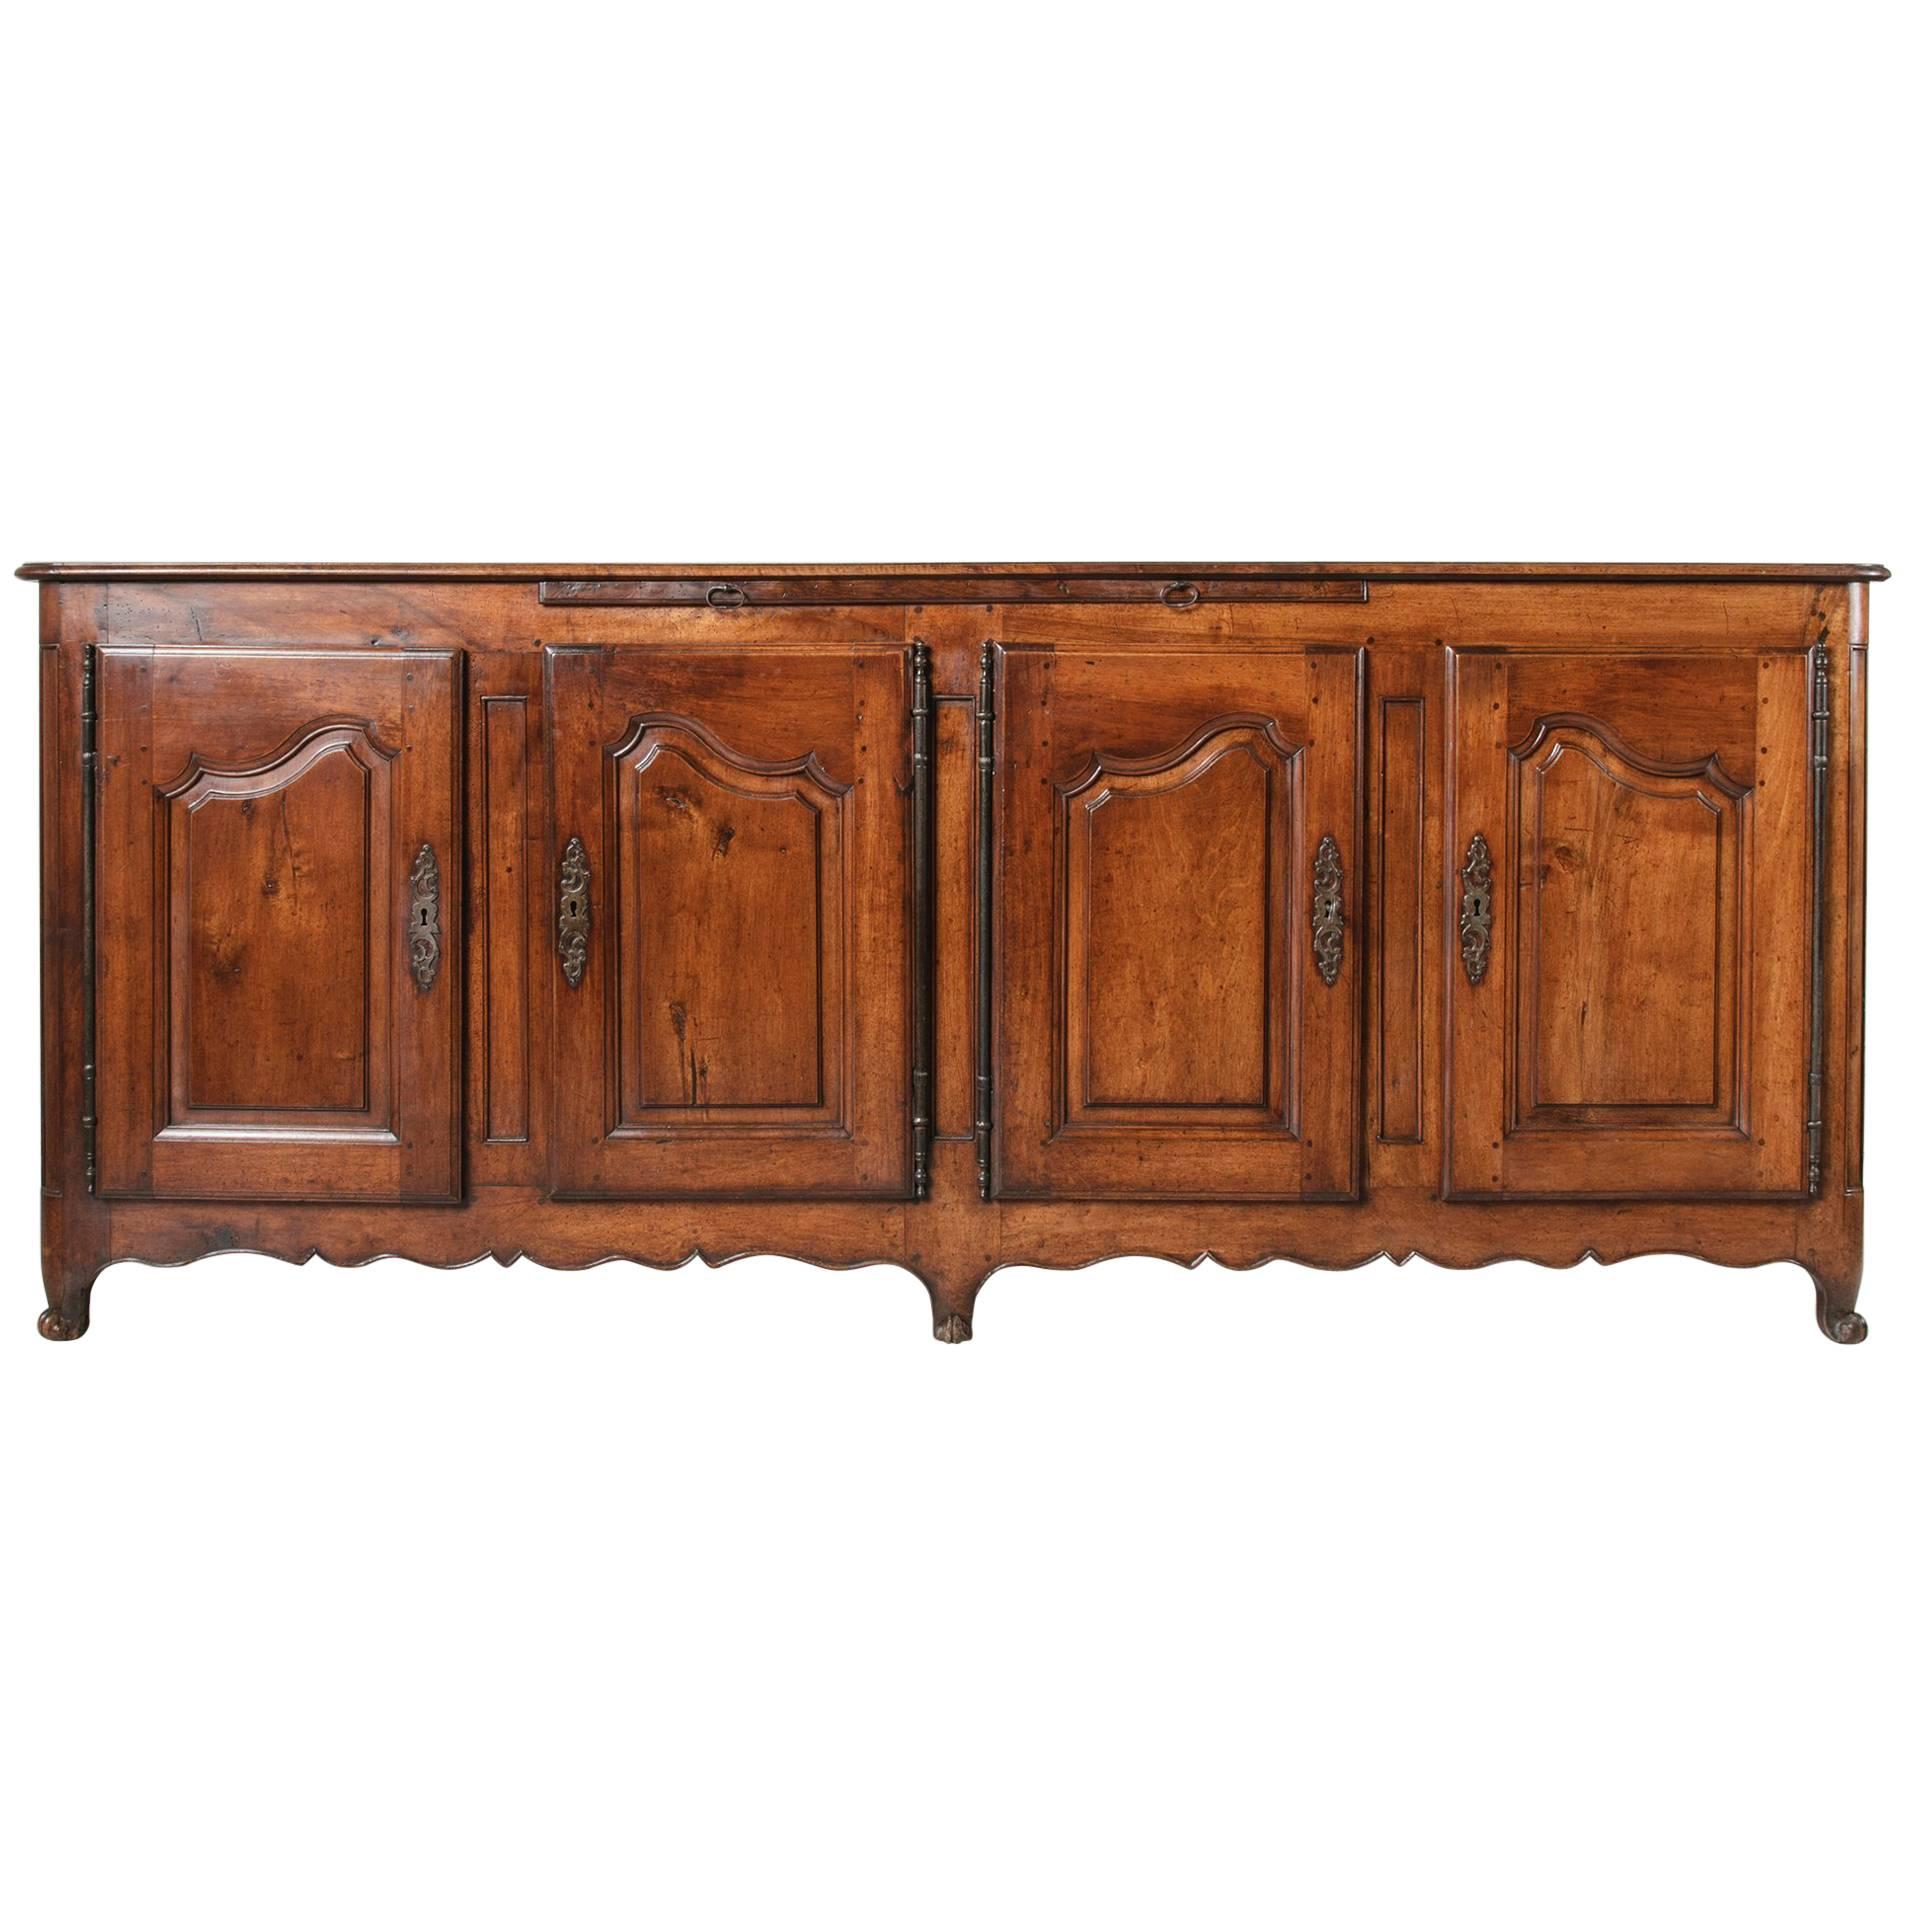 18th Century Louis XV Period French Hand-Carved Walnut Sideboard Enfilade Buffet